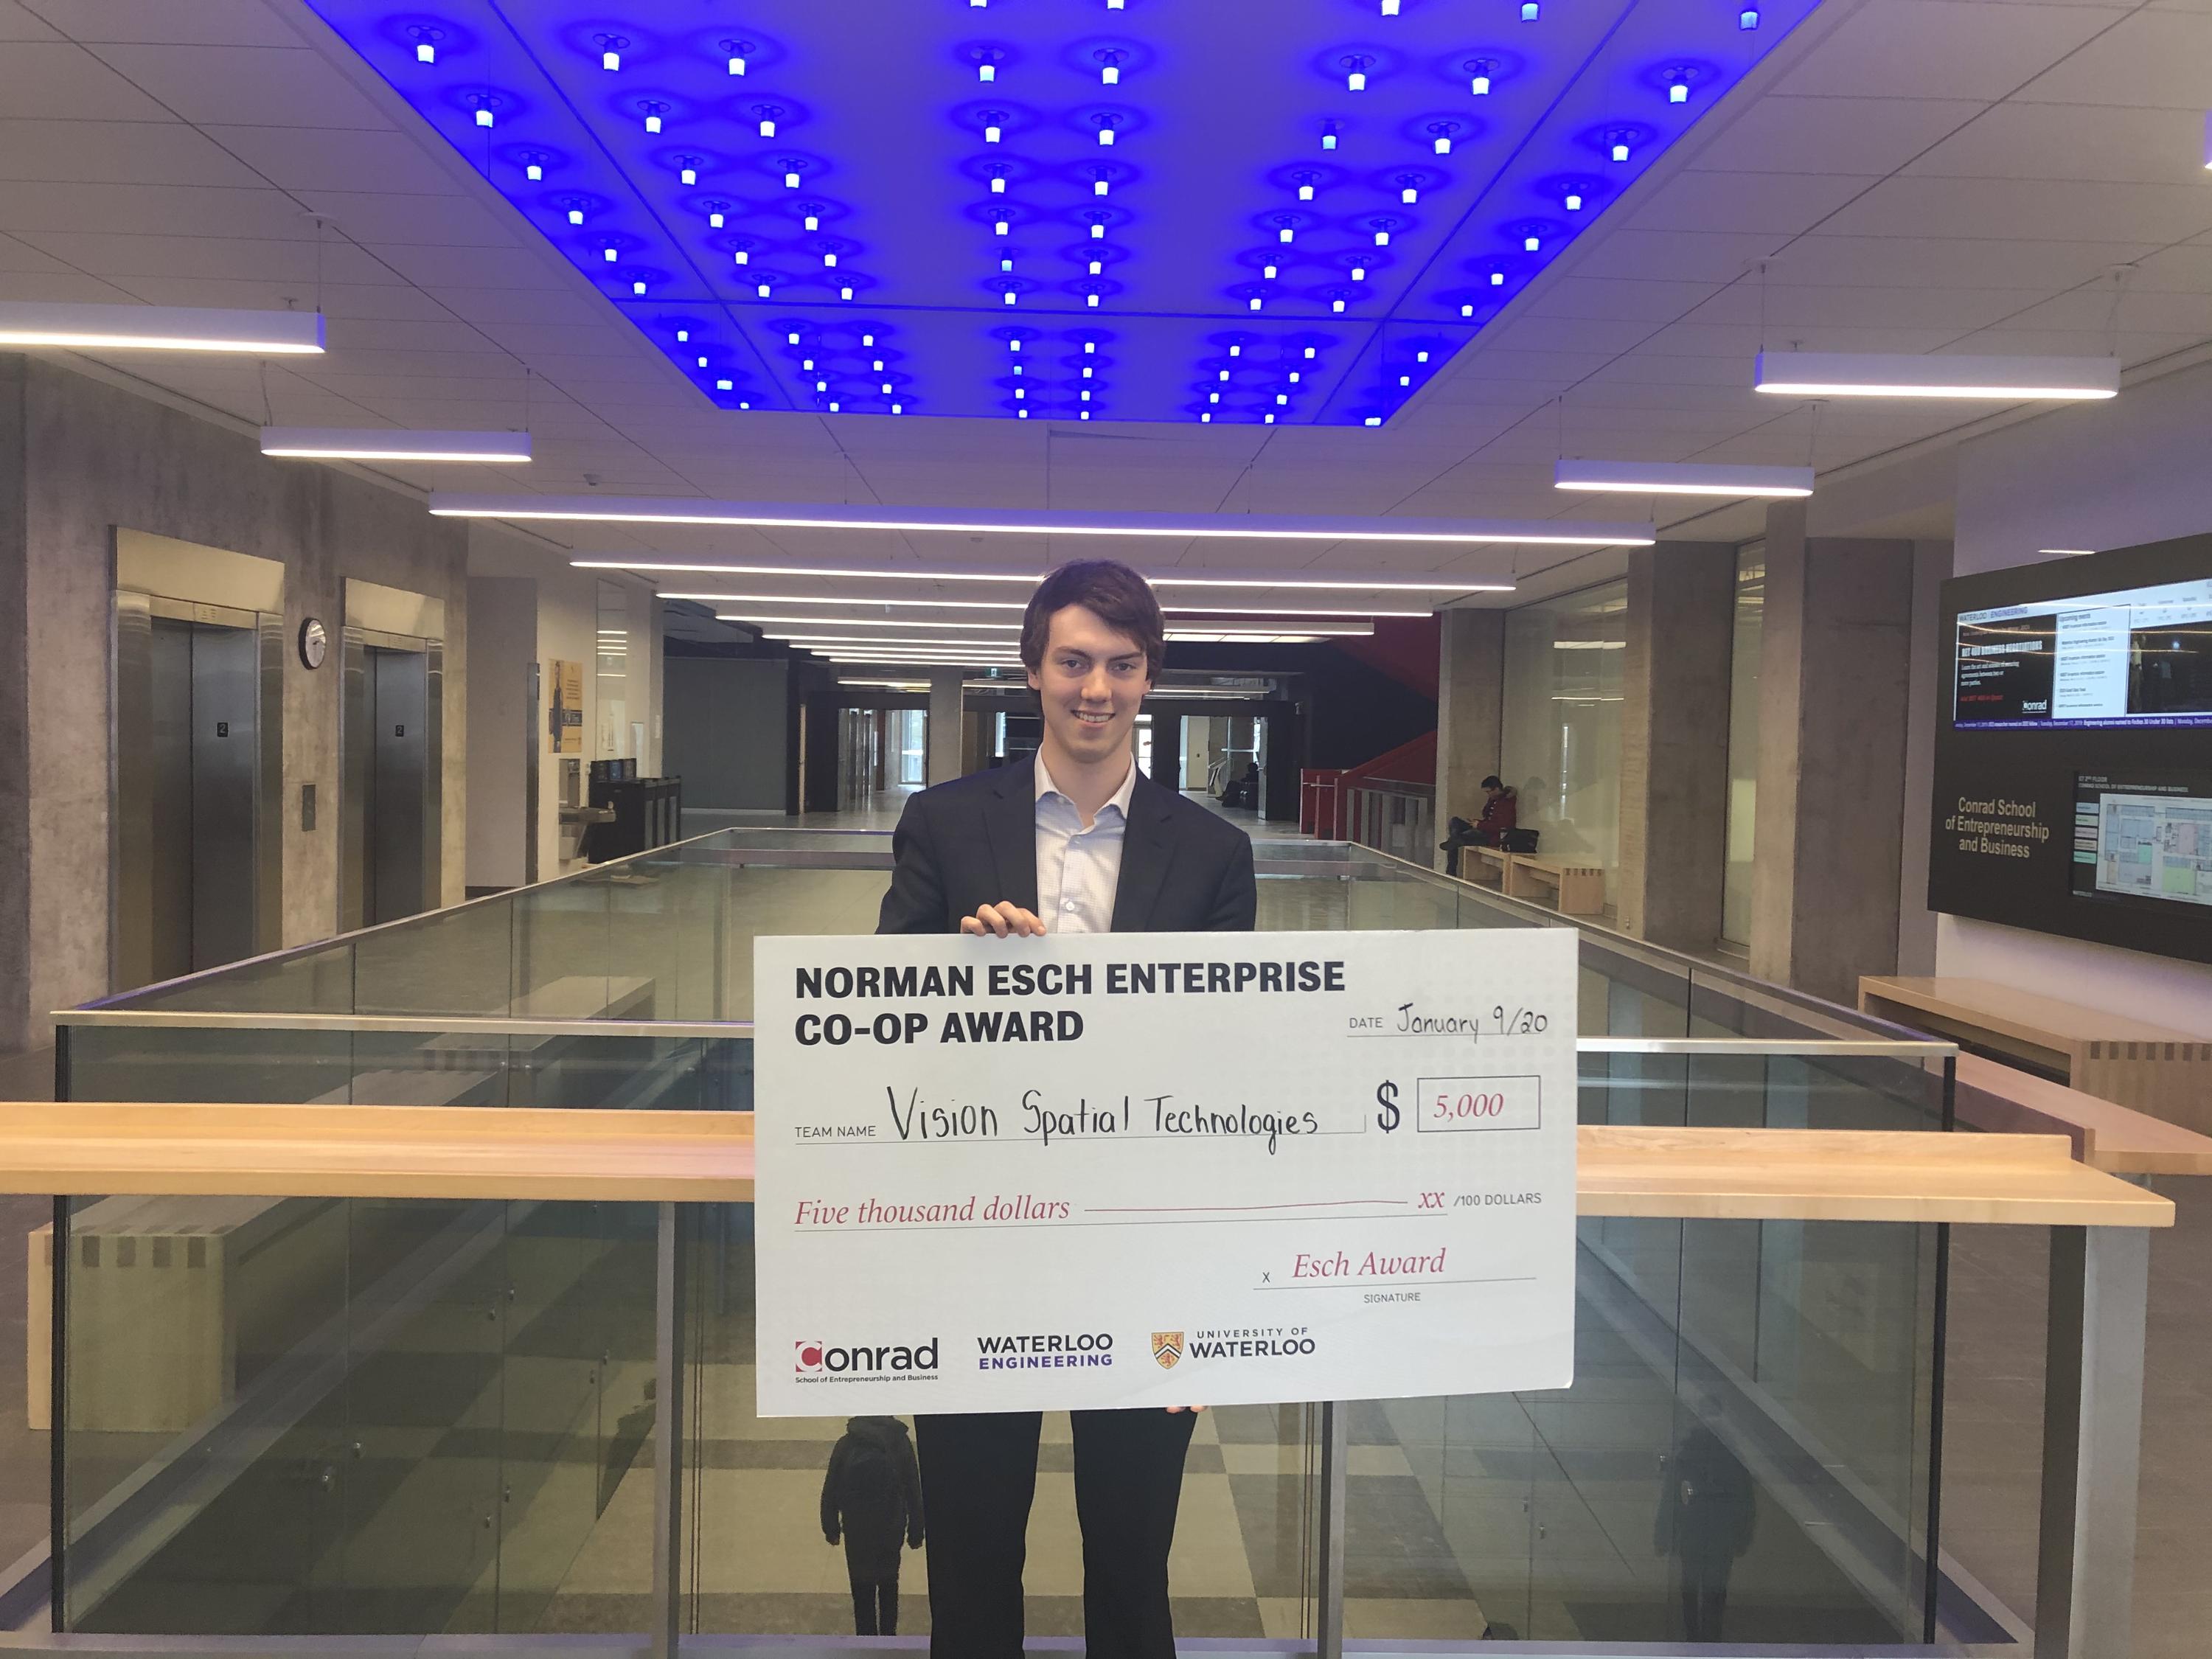 Sam Dugan, founder of Vision Spatial Technologies Inc. holds cheque for $5,000